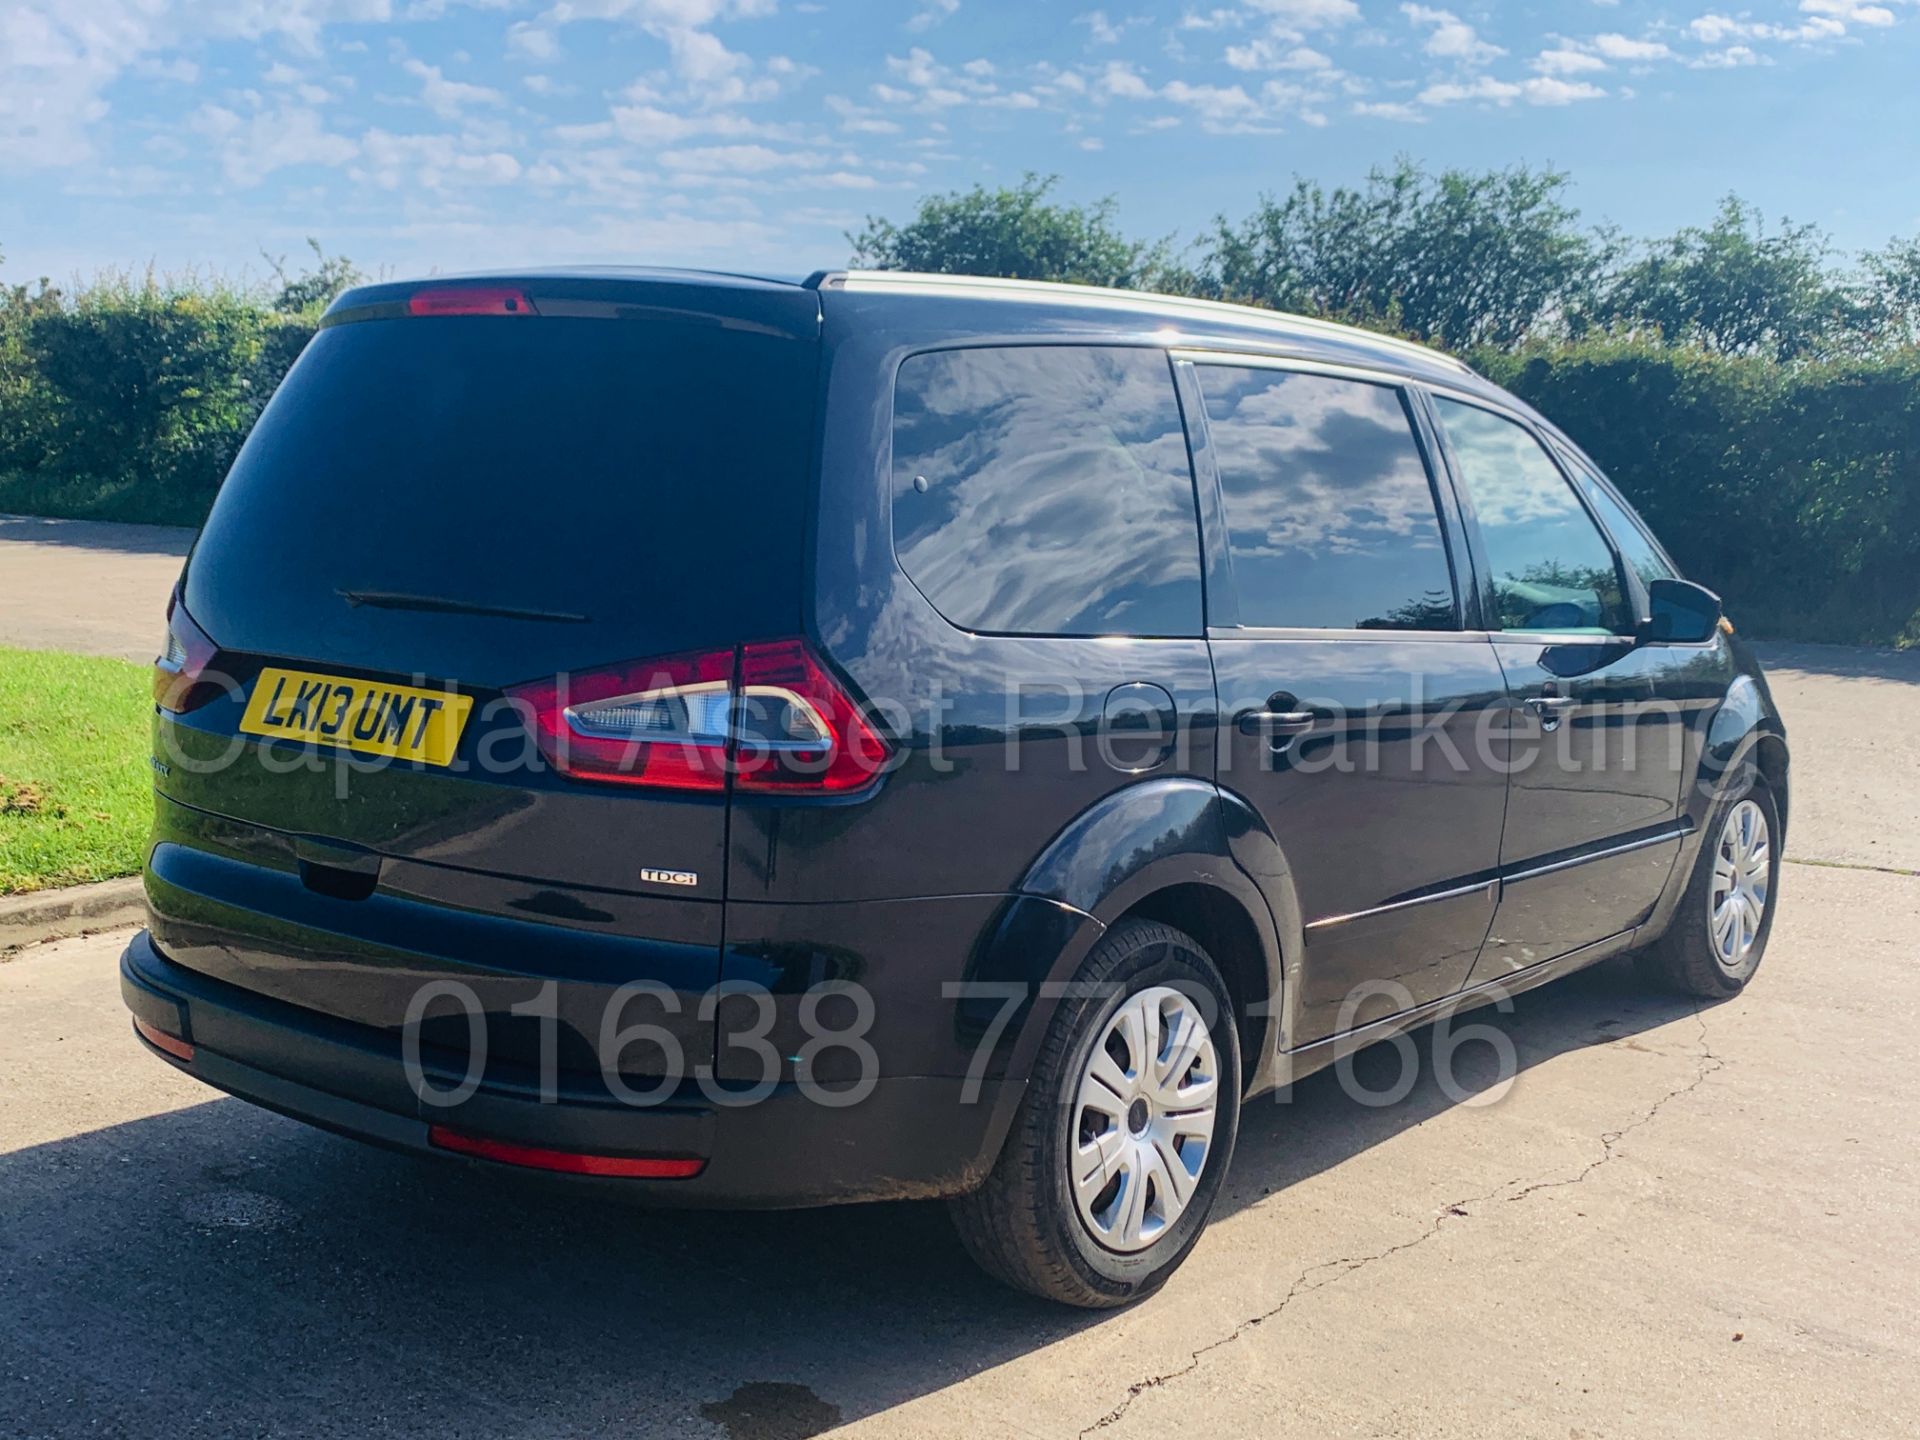 (ON SALE) FORD GALAXY *ZETEC* 7 SEATER MPV (2013) '2.0 TDCI - POWER SHIFT' (NO VAT - SAVE 20%) - Image 6 of 31